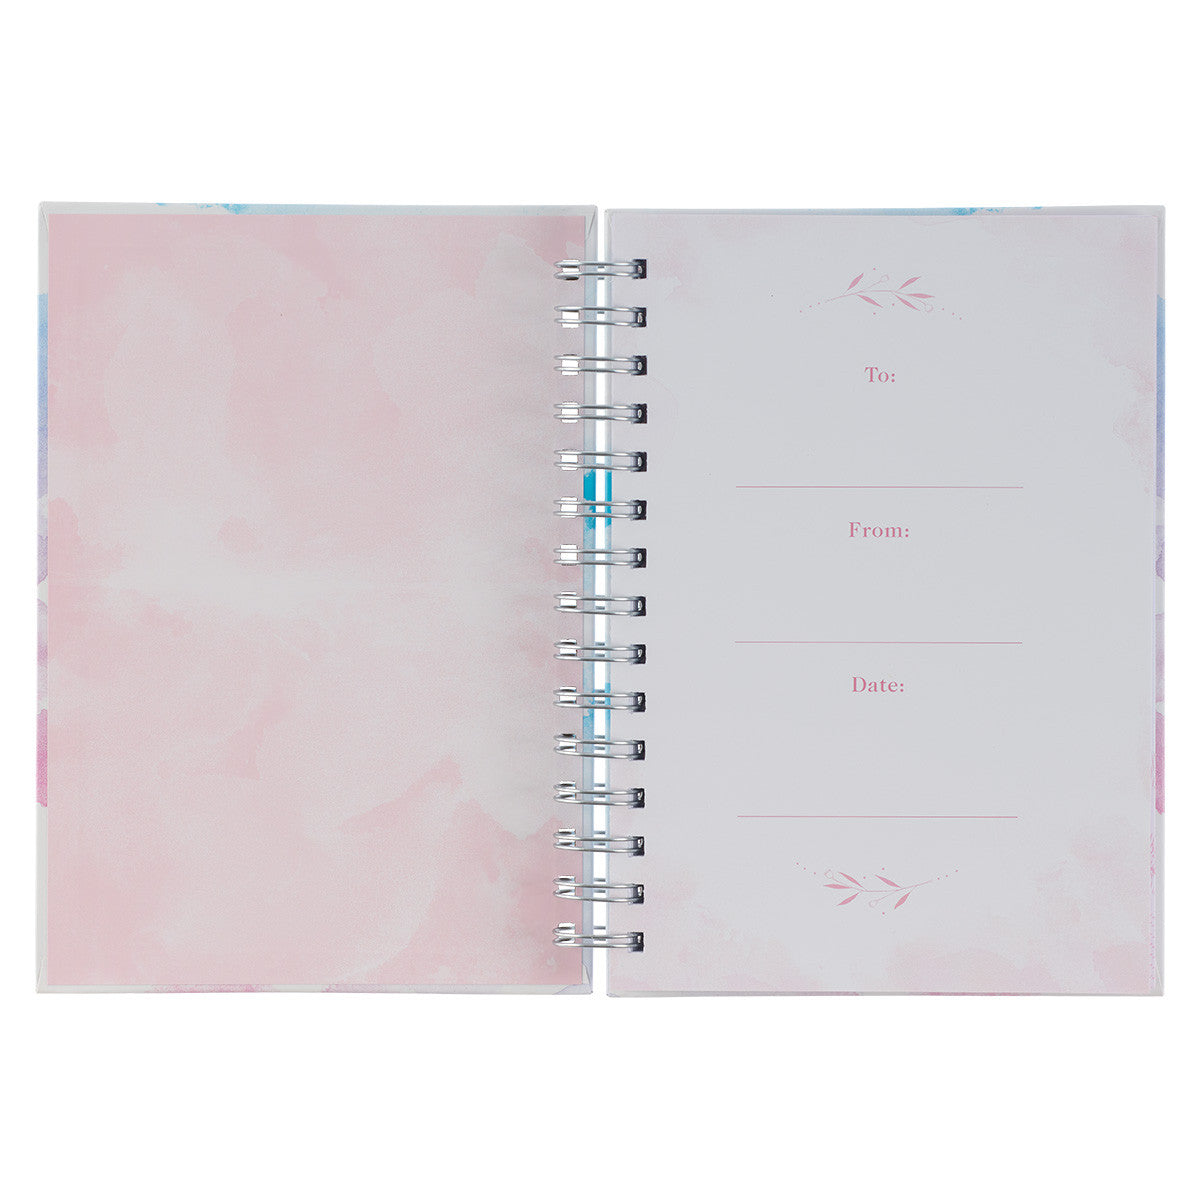 Be Still & Know Pink and Blue Watercolour Large Wirebound Journal - Psalm 46:10 - The Christian Gift Company